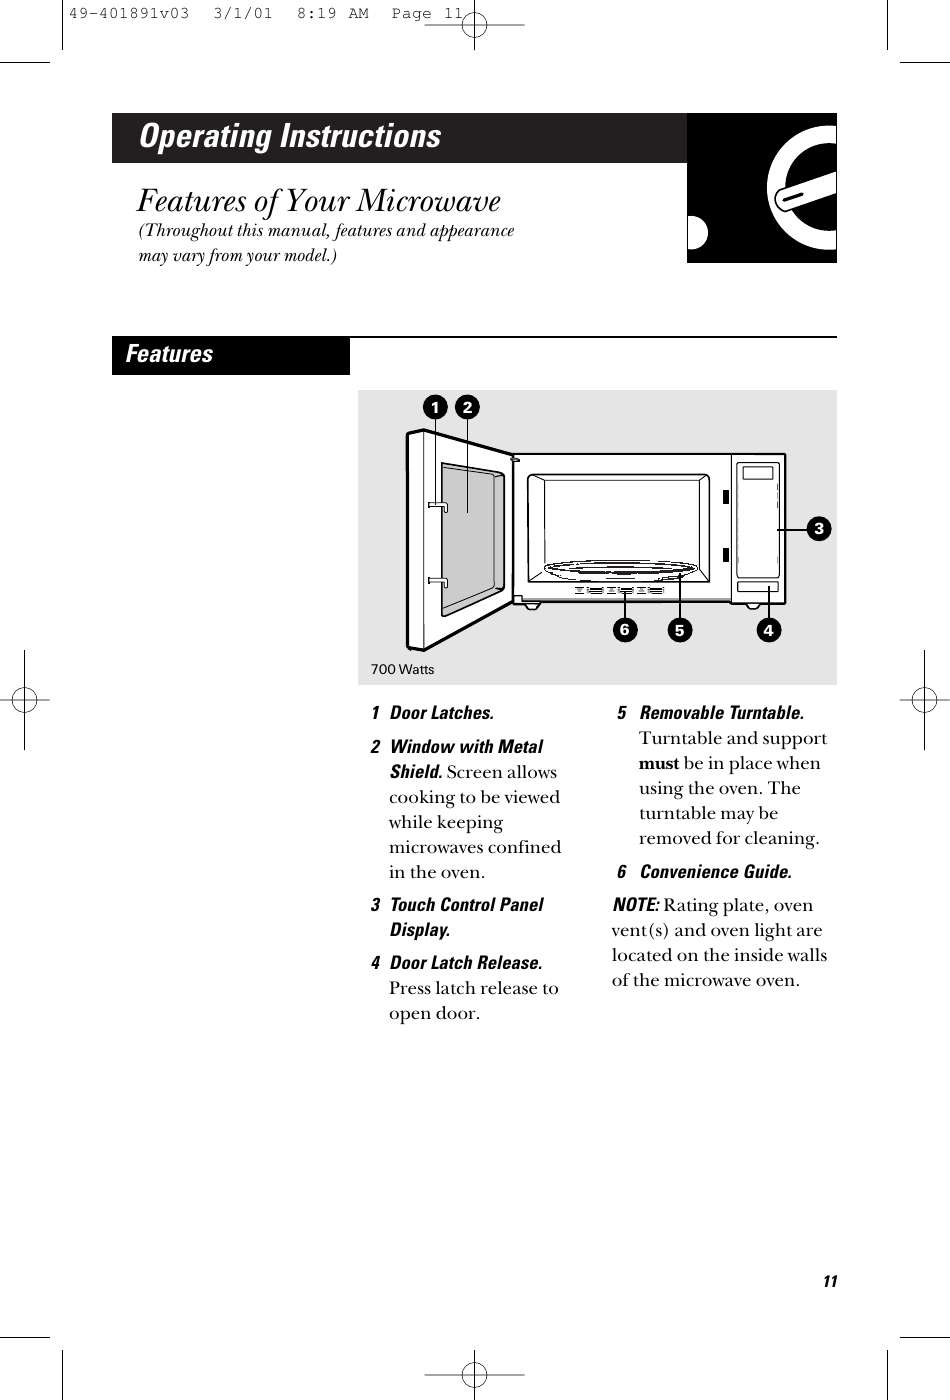 Operating InstructionsFeatures of Your Microwave(Throughout this manual, features and appearancemay vary from your model.)1 Door Latches.2 Window with MetalShield. Screen allowscooking to be viewedwhile keepingmicrowaves confined in the oven.3 Touch Control PanelDisplay.4 Door Latch Release.Press latch release toopen door.5 Removable Turntable.Turntable and supportmust be in place whenusing the oven. Theturntable may beremoved for cleaning.6 Convenience Guide.NOTE: Rating plate, ovenvent(s) and oven light arelocated on the inside wallsof the microwave oven.Features2165 4311700 Watts49-401891v03  3/1/01  8:19 AM  Page 11